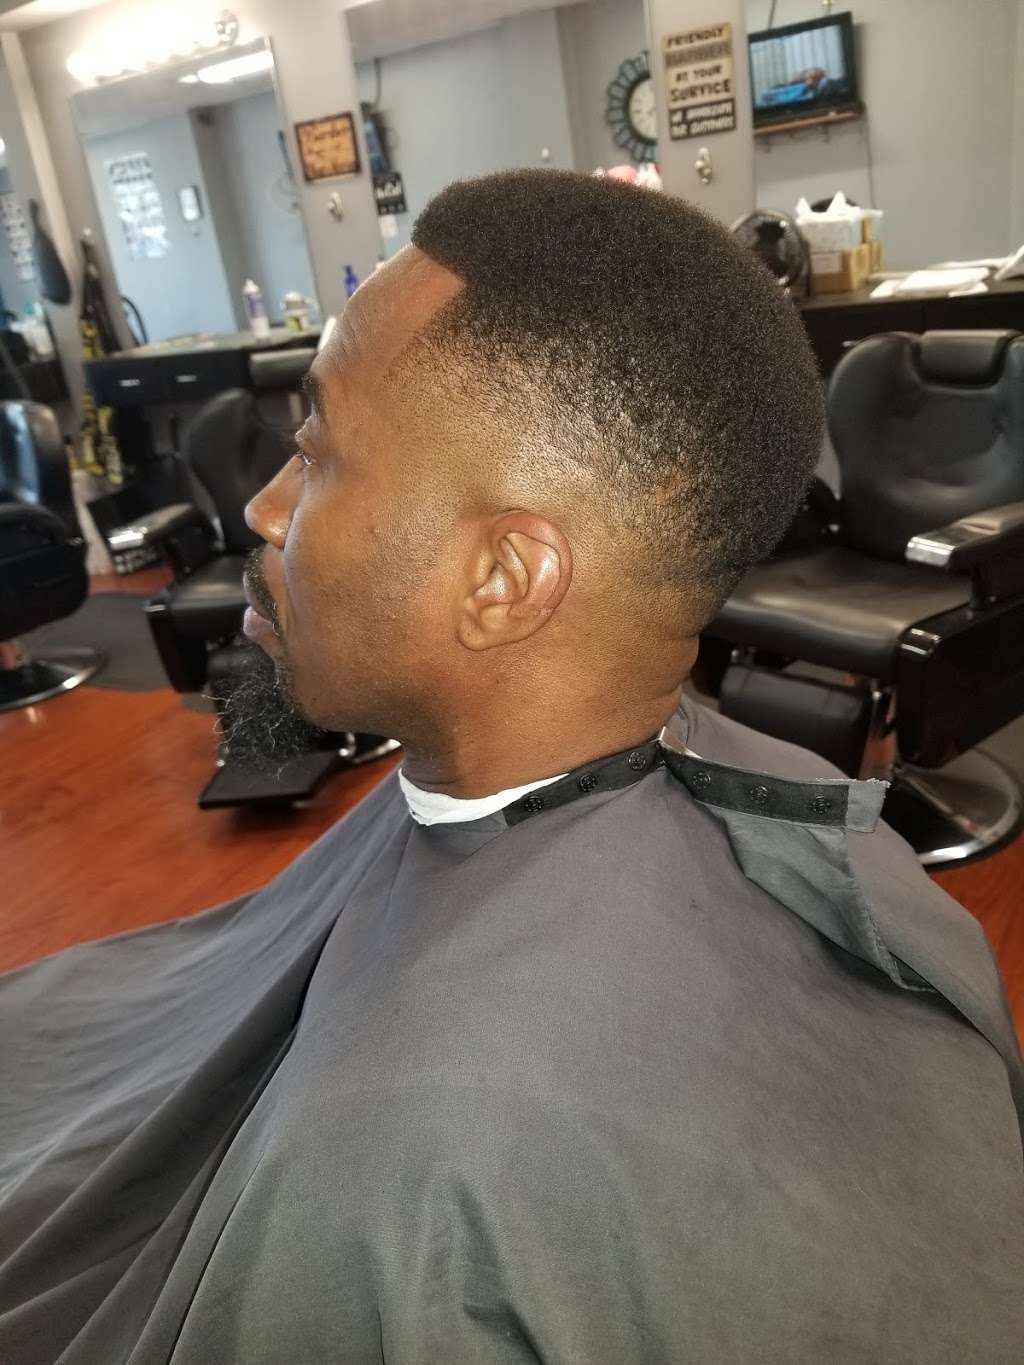 Royal Cuts Gentlemens Grooming - hair care  | Photo 7 of 10 | Address: 3824 Bladensburg Rd, Cottage City, MD 20722, USA | Phone: (240) 714-5505